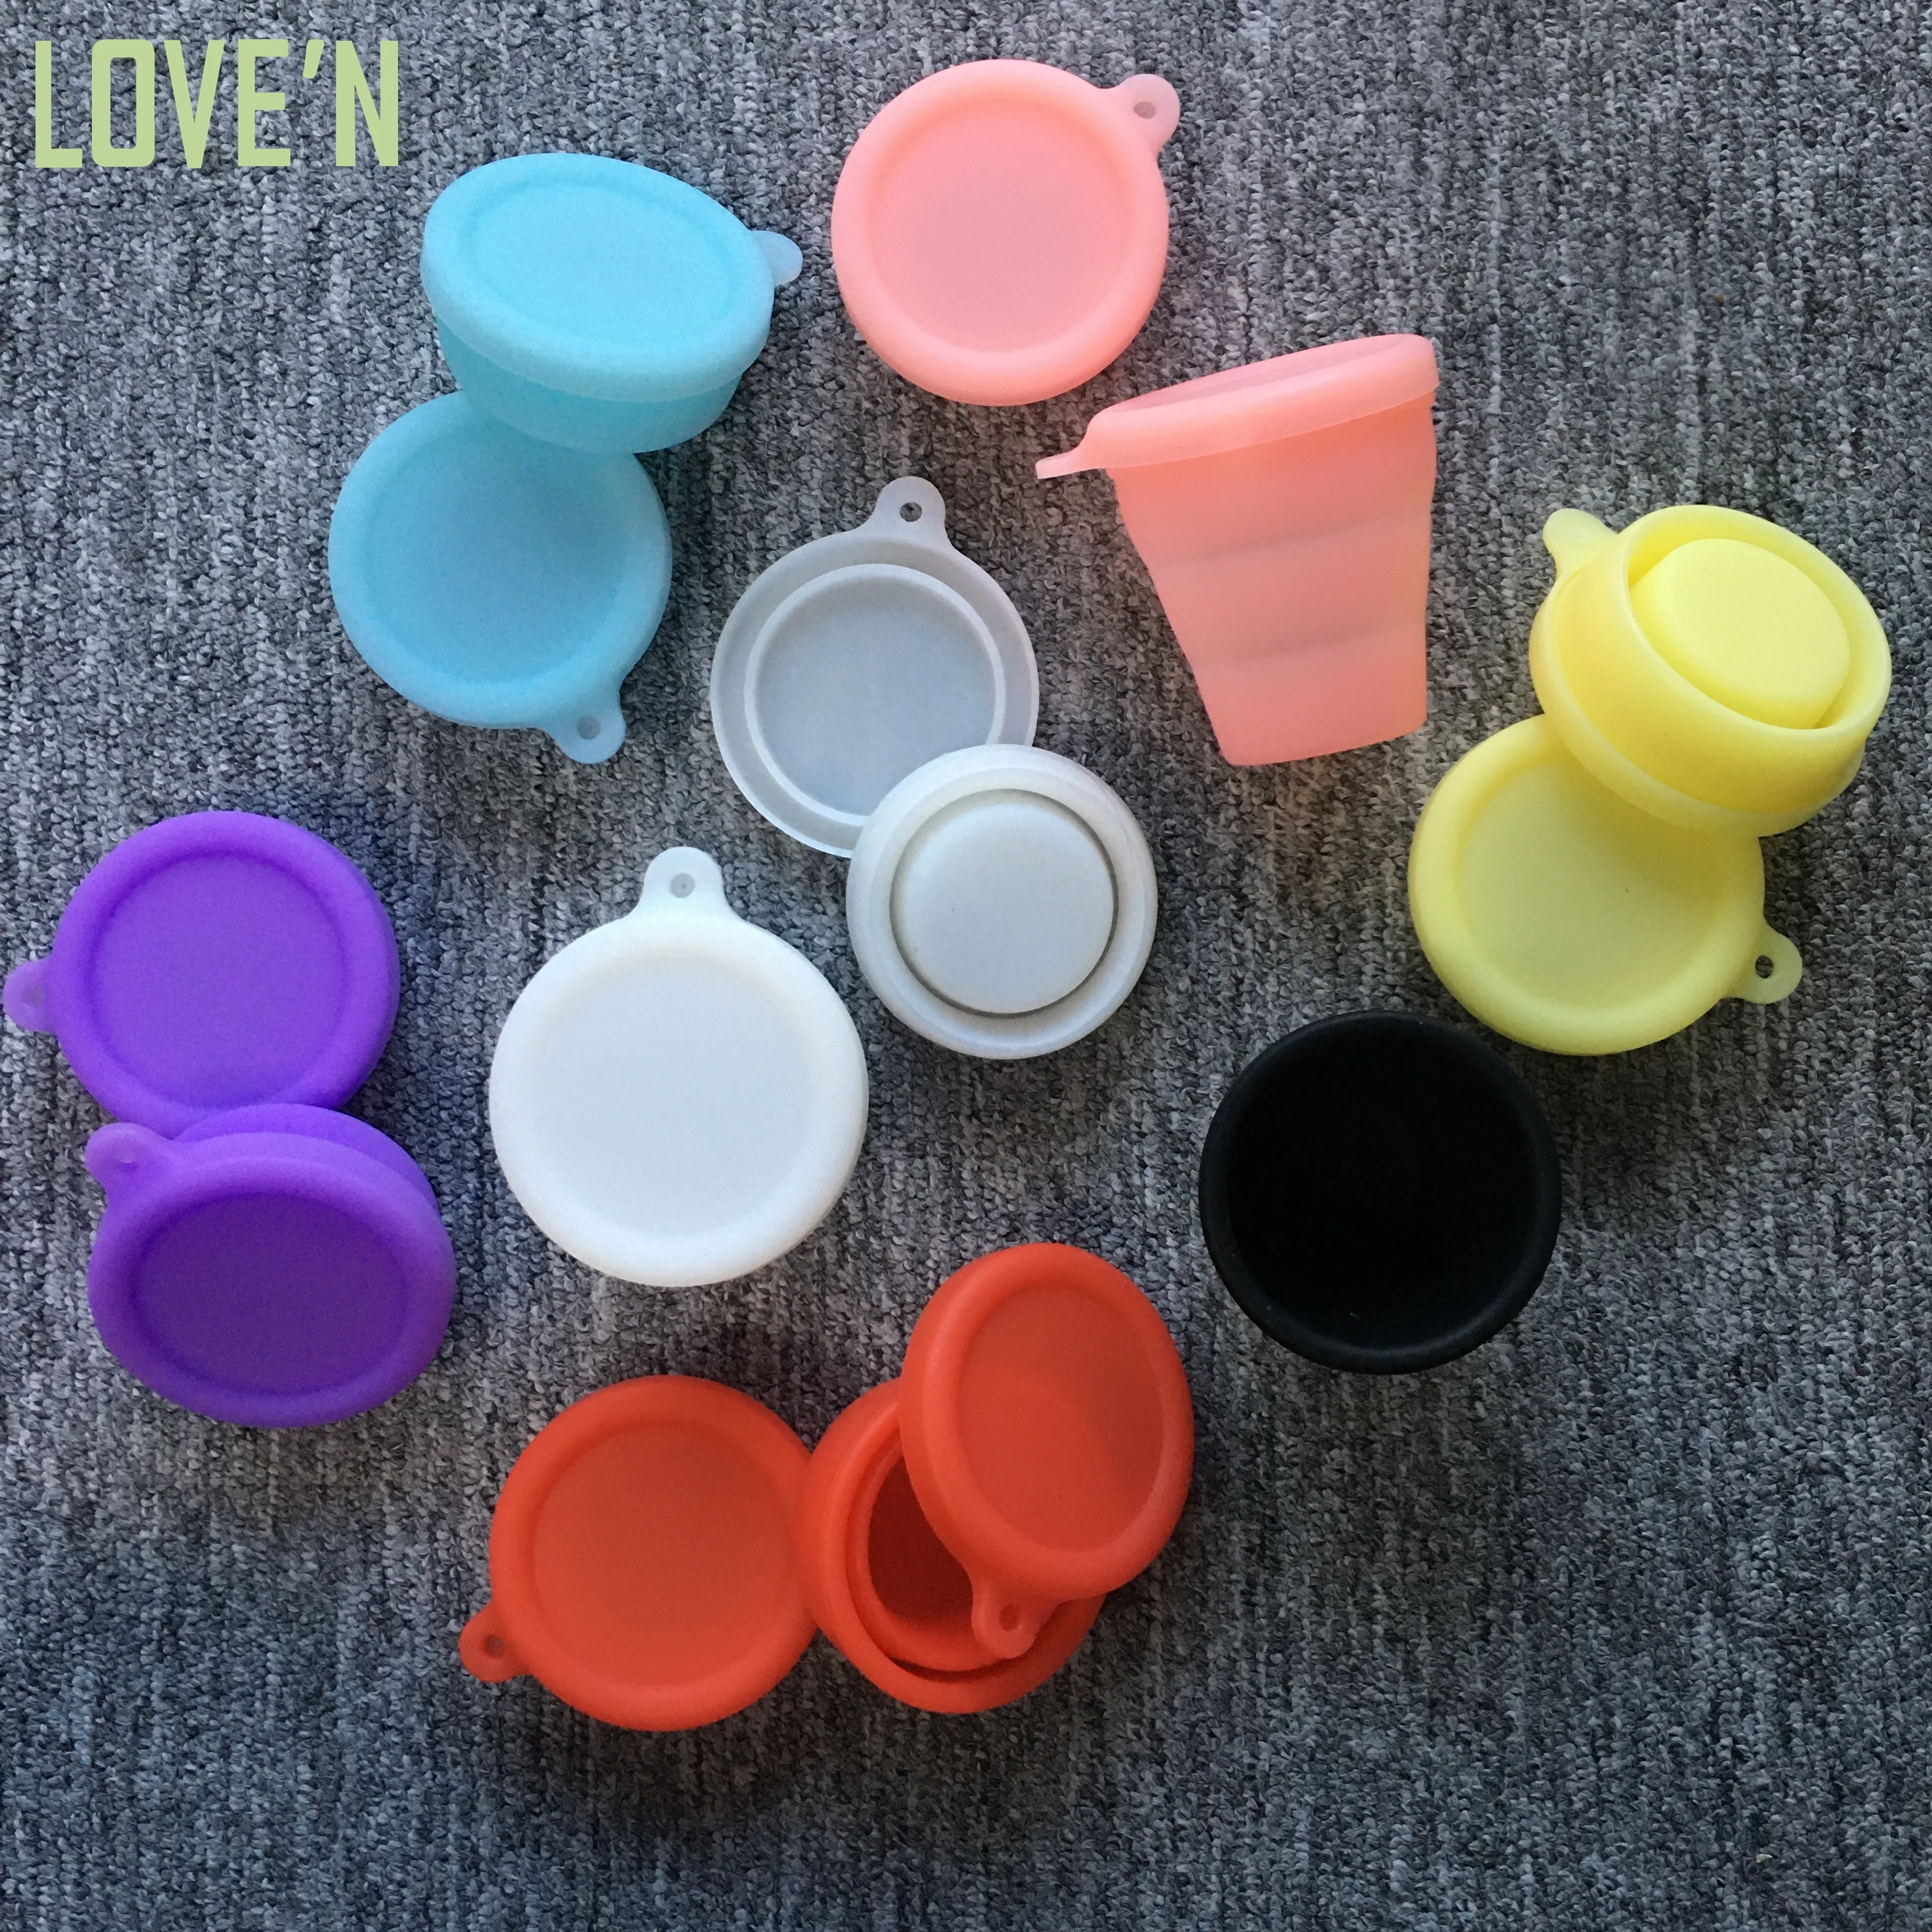 

LOVE'N LV201C eco Outdoor Portable Drinking Telescopic Collapsible Retractable Folding Silicone water cup with Lid for Travel